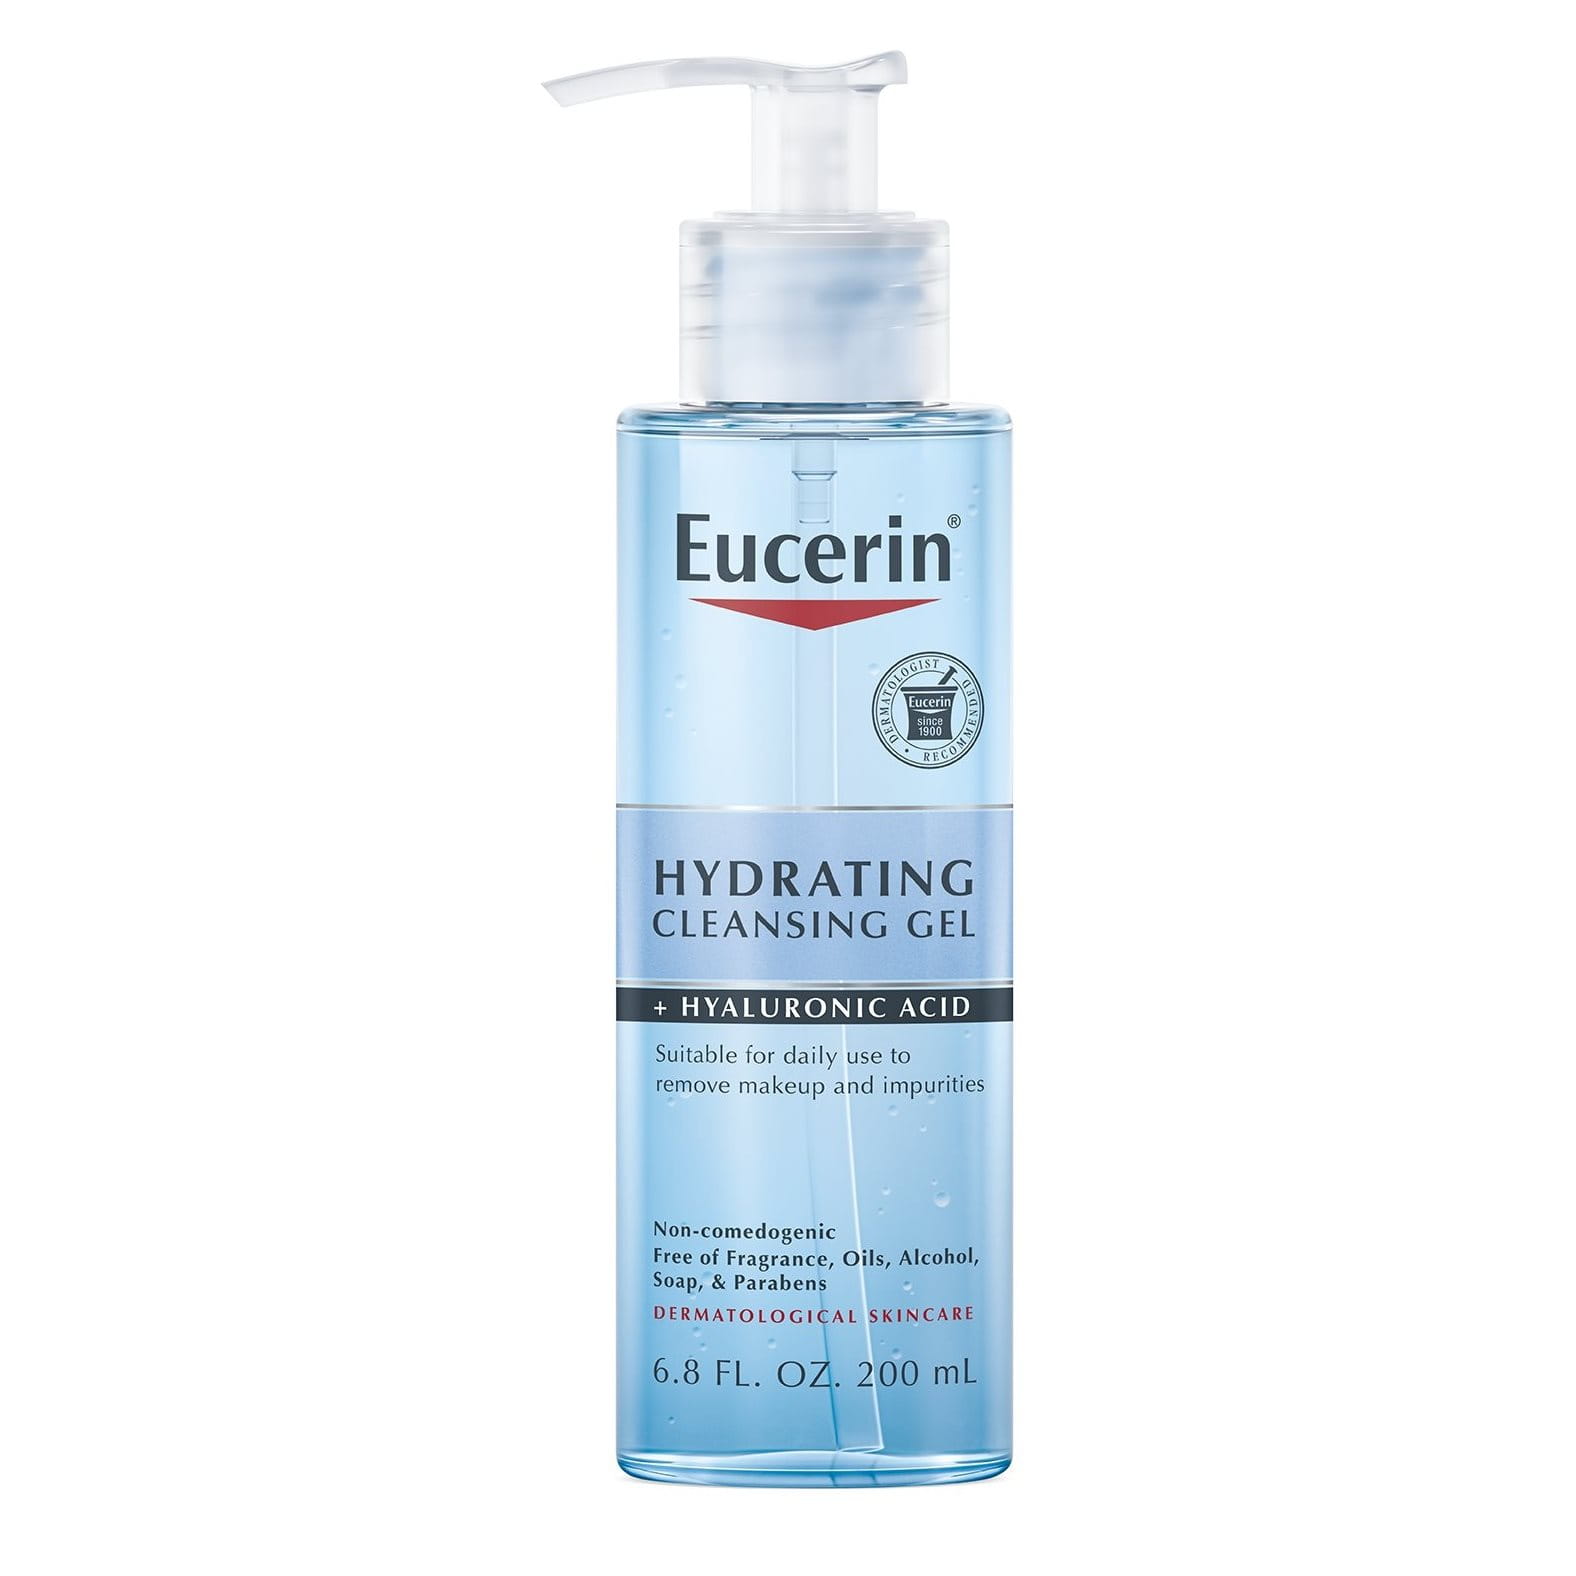 Hydrating Face Cleansing Gel,Hyaluronic Acid